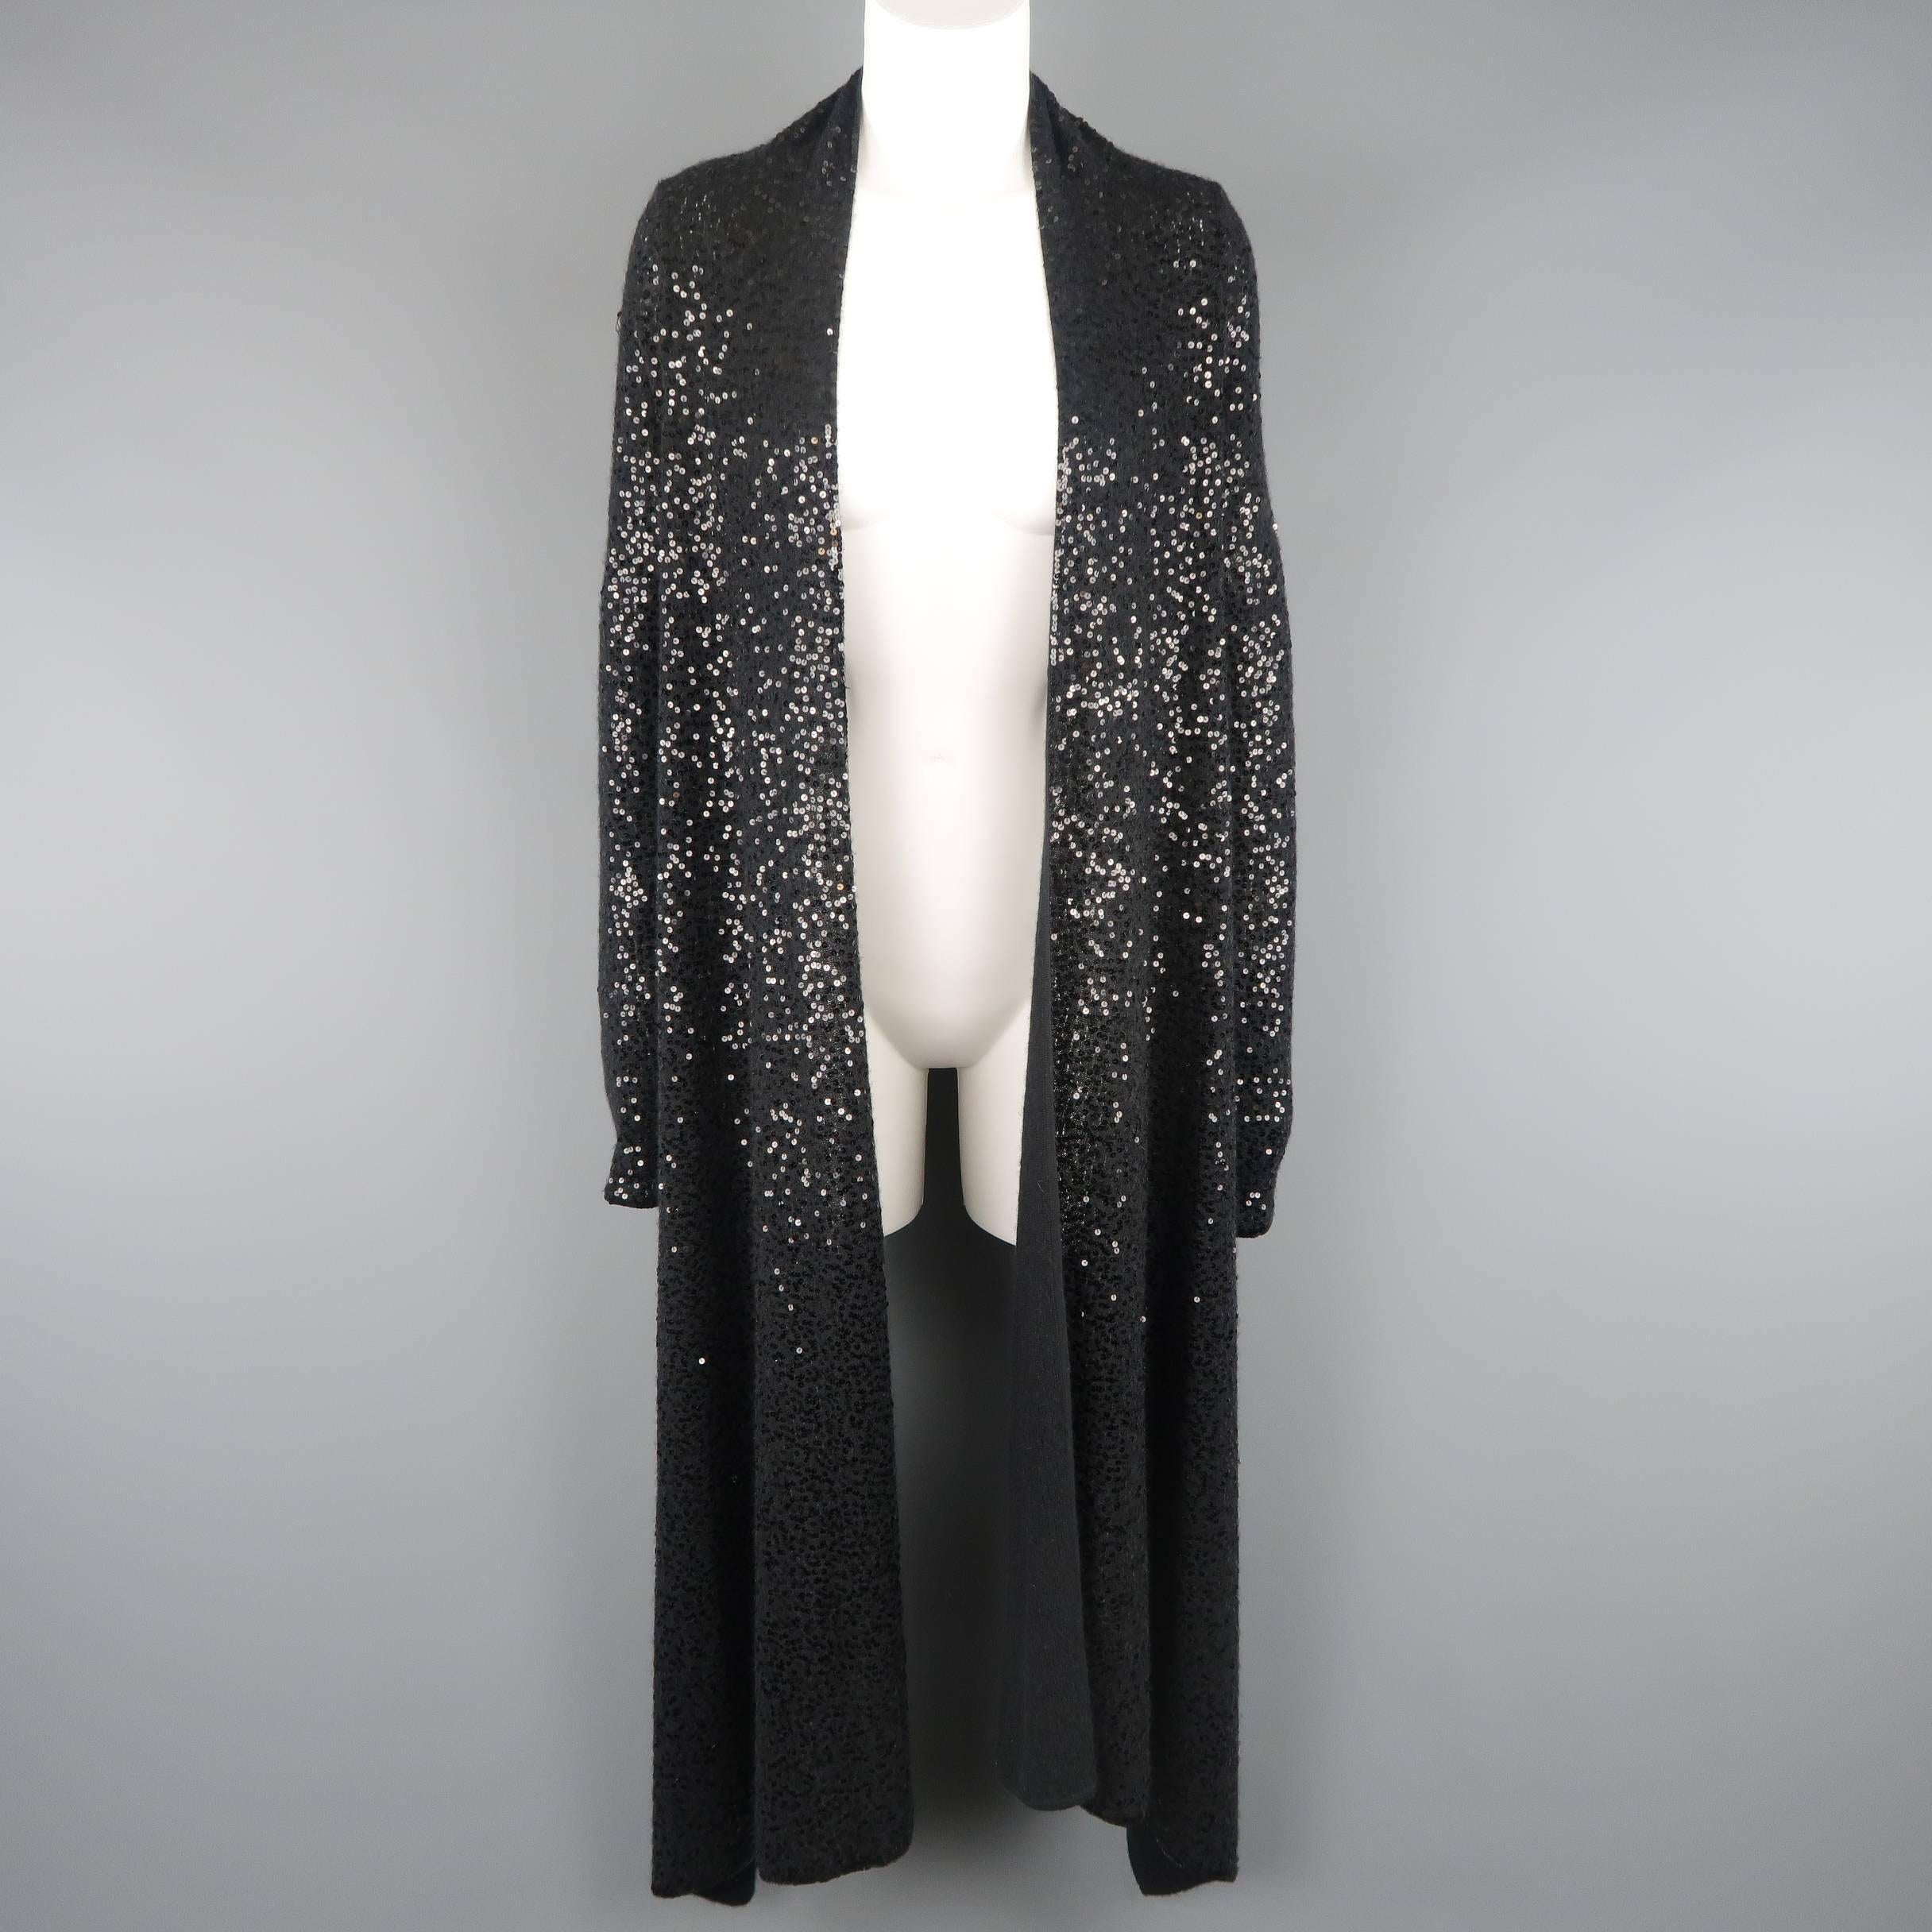 DONNA KARAN Black Label cardigan comes in black sequined cashmere silk blend knit with an open front, extended draped collar, and short back.
 
Good Pre-Owned Condition.
Marked: S
 
Measurements:
 
Shoulder: 16 in.
Bust: 38 in.
Sleeve: 22